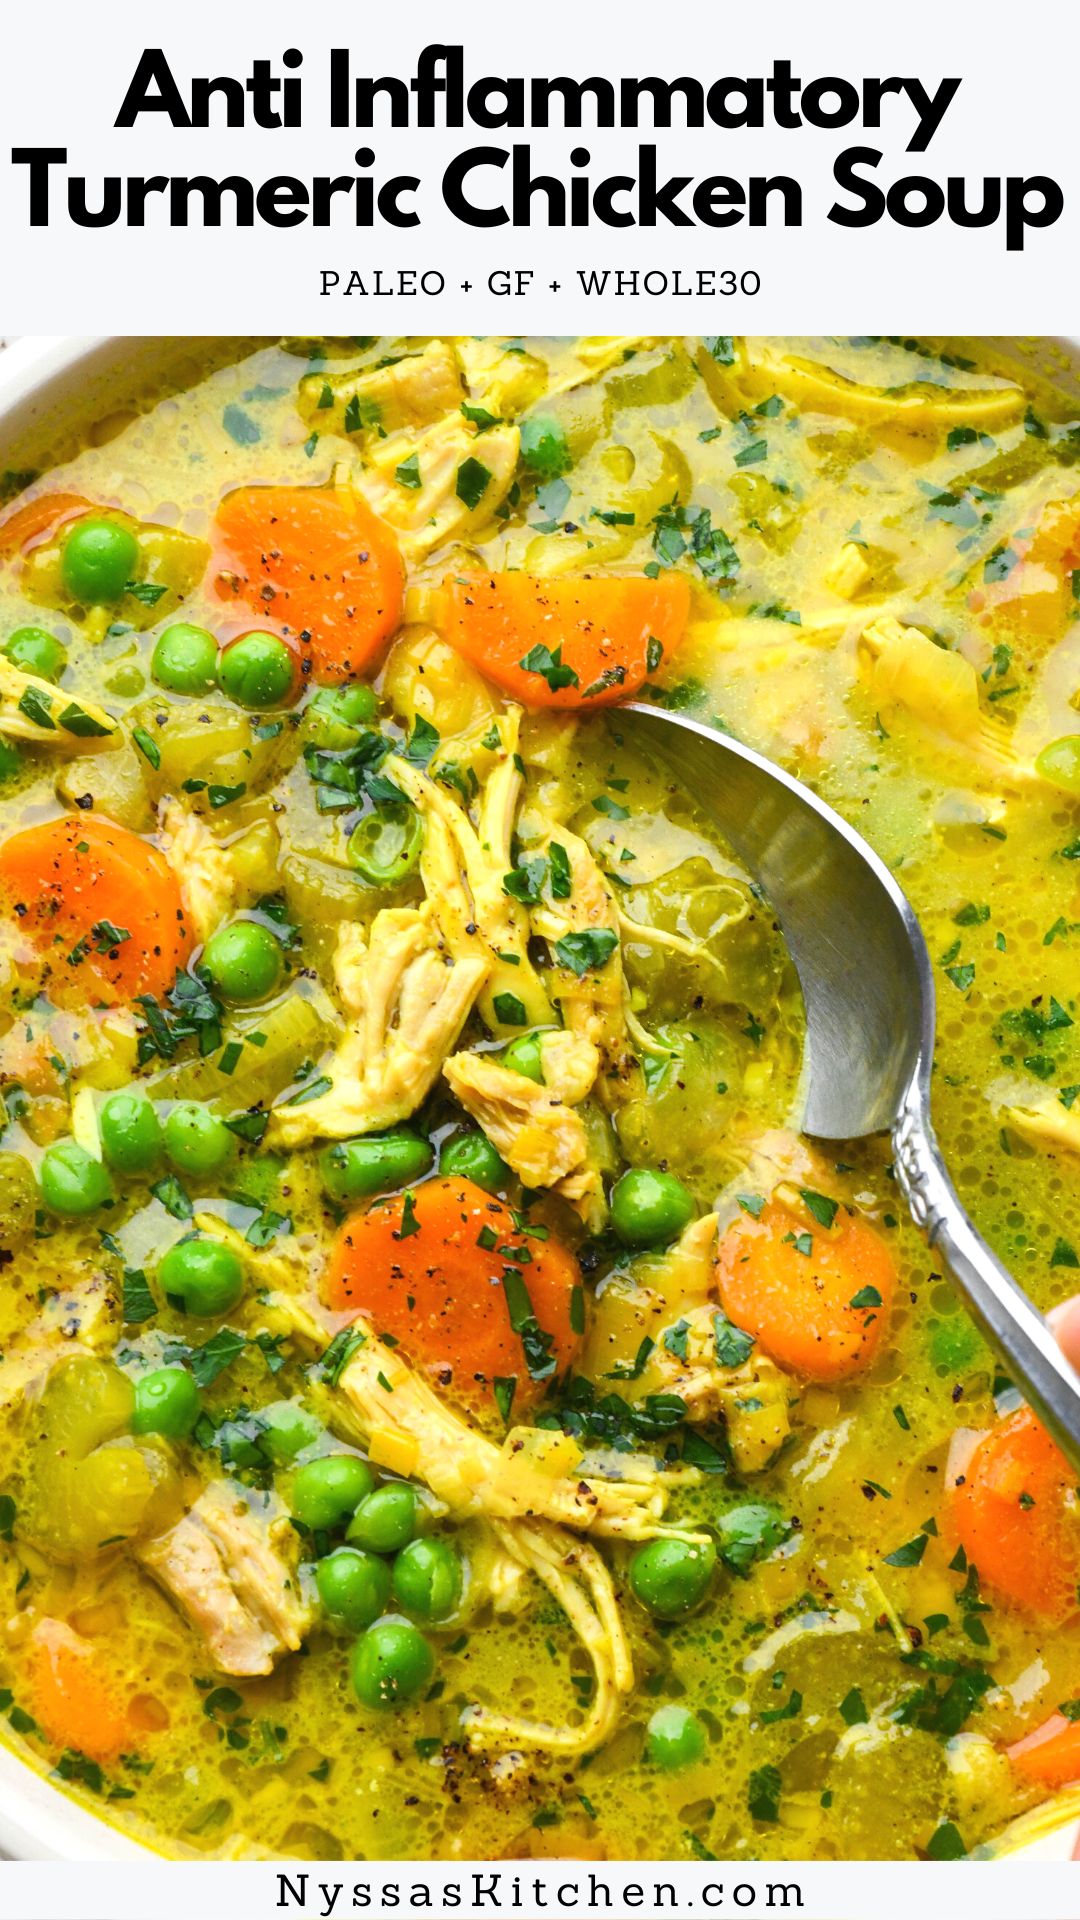 This anti inflammatory turmeric chicken soup is made in one pot with leeks, onions, carrots, celery, peas, chicken, chicken broth, coconut milk, and flavorful spices. It is packed with nutrients, and perfect for meal prep or family dinner. The best way to warm up with when you need some homemade nourishment! Dairy free, paleo, gluten free, vegetarian option.